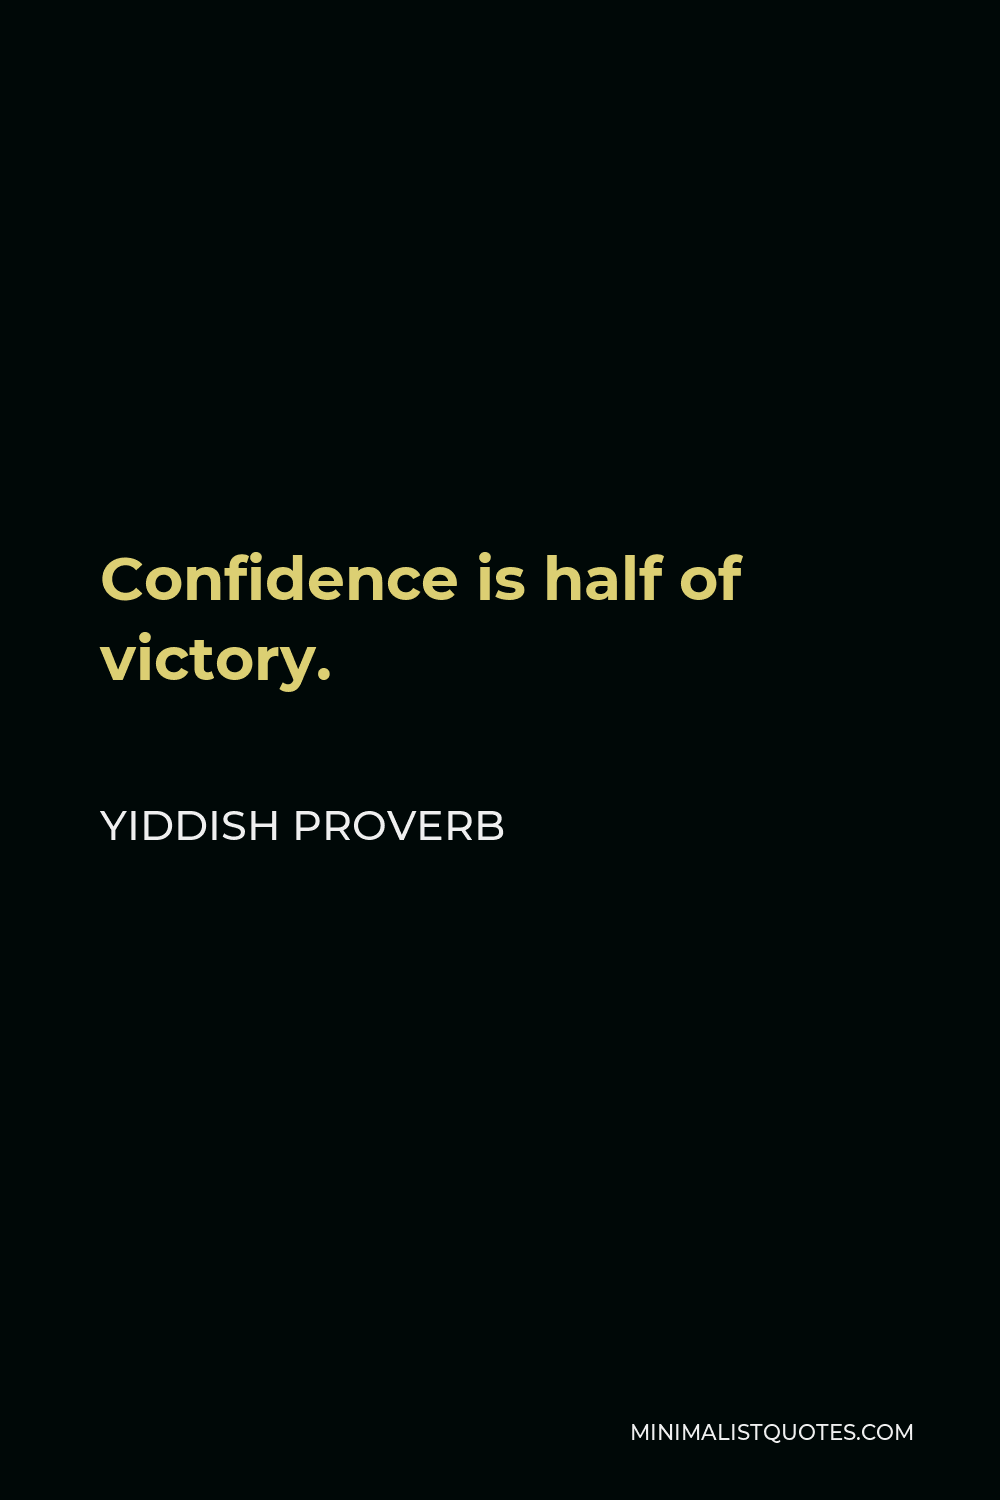 Yiddish Proverb Quote - Confidence is half of victory.